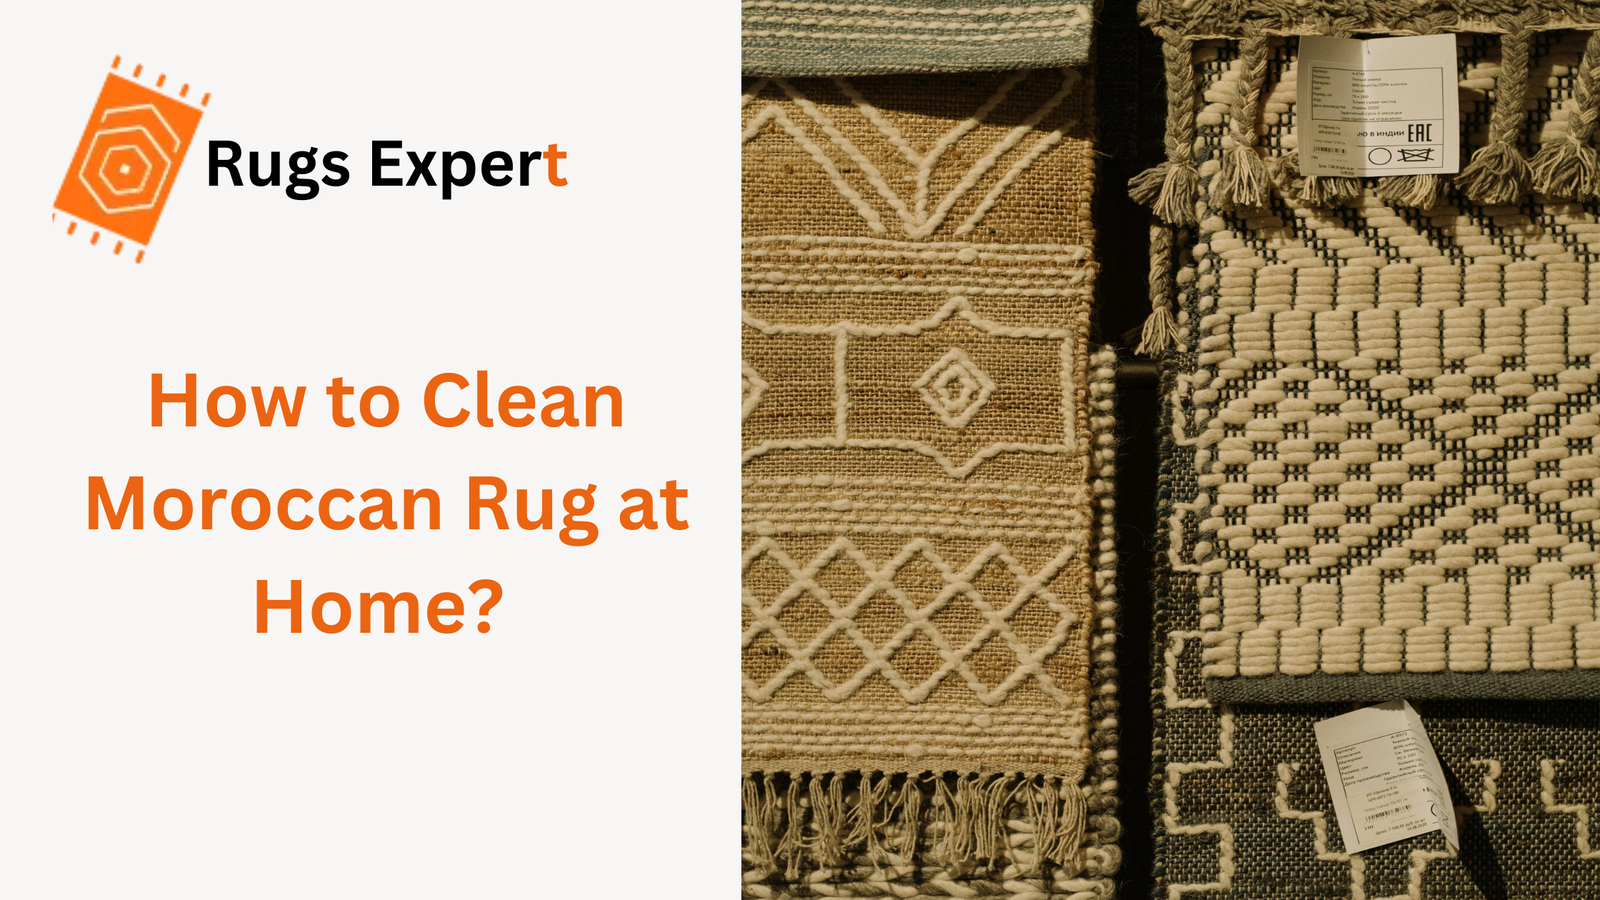 Moroccan rugs with text that is how to clean moroccan rug at home